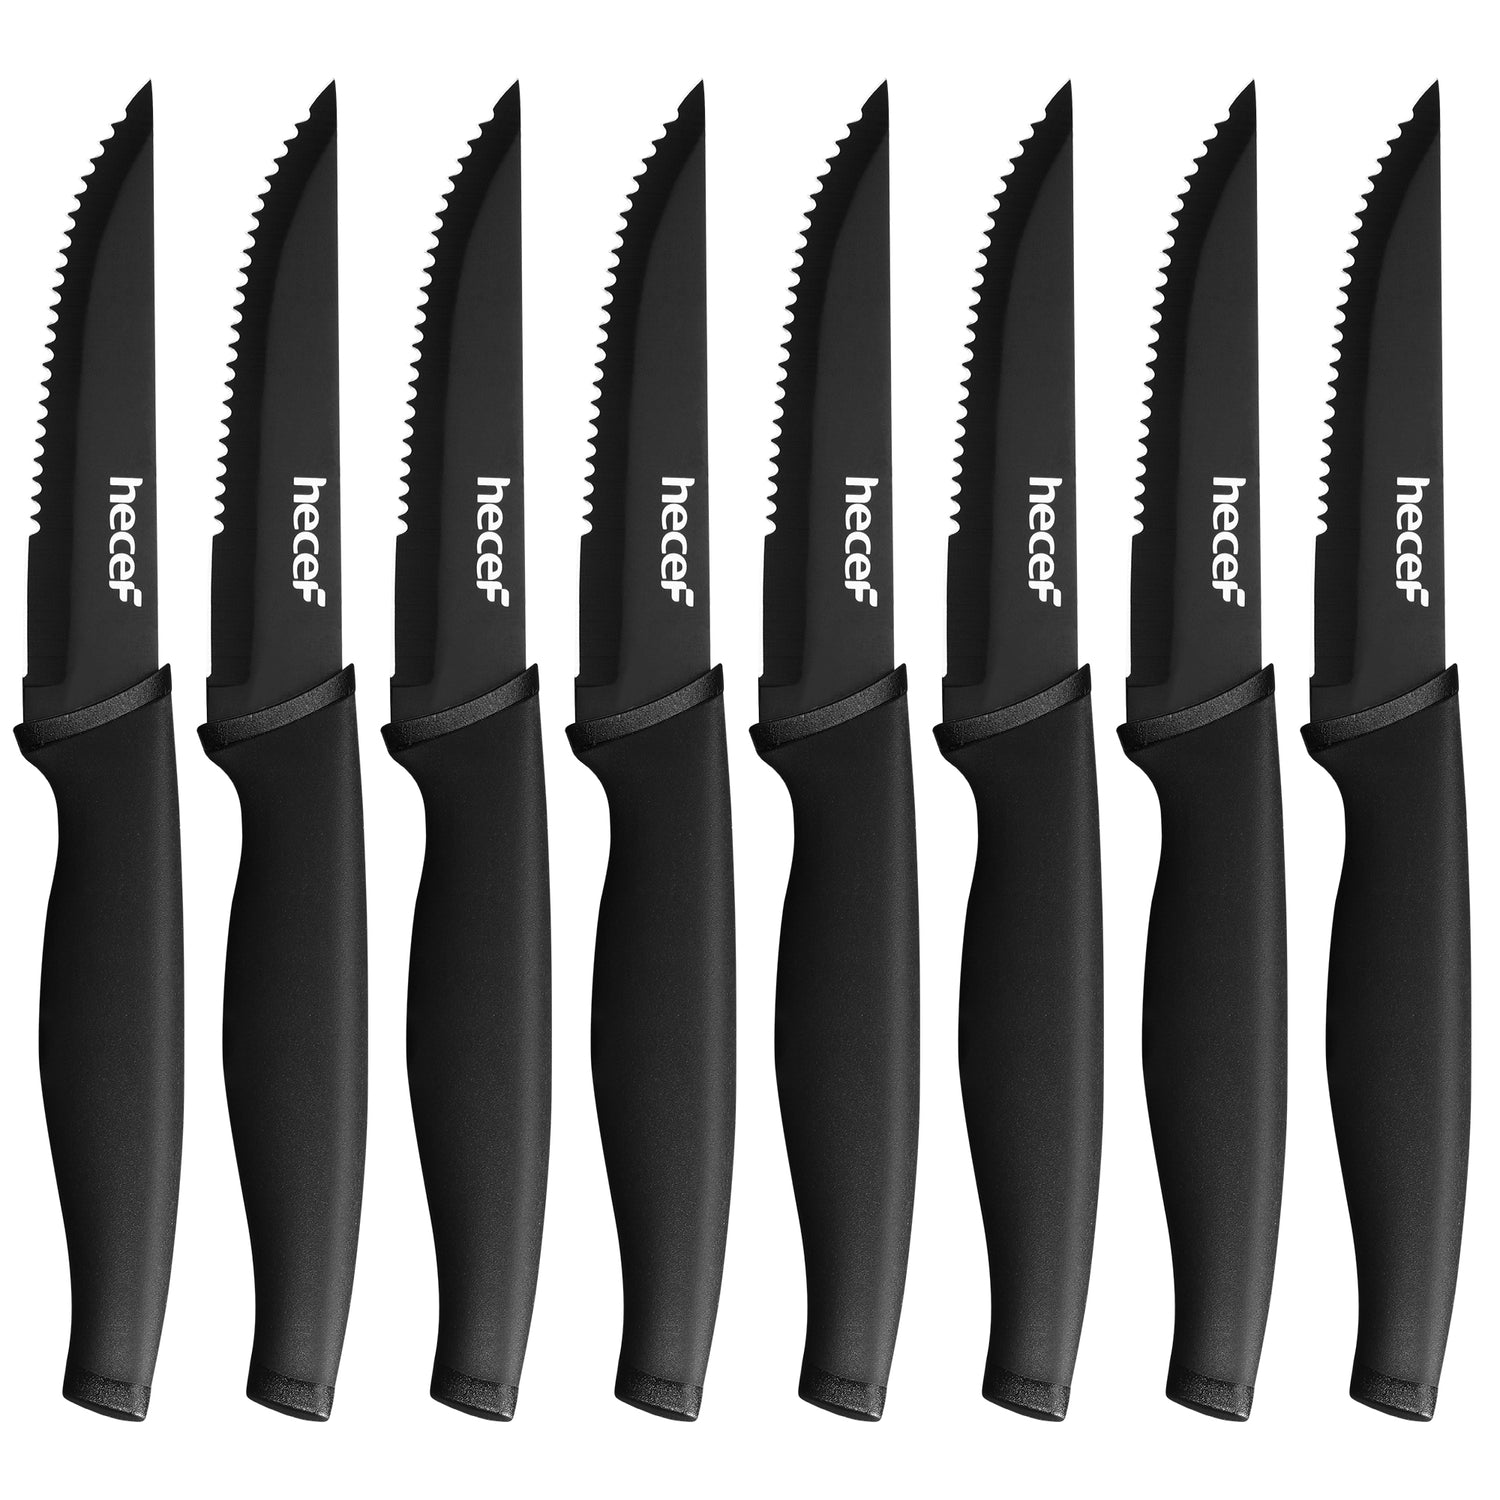 Hecef 14 Pcs Knife Block Set High Carbon Stainless Steel Cutlery Set with Chef Steak Knives, Size: One size, Black